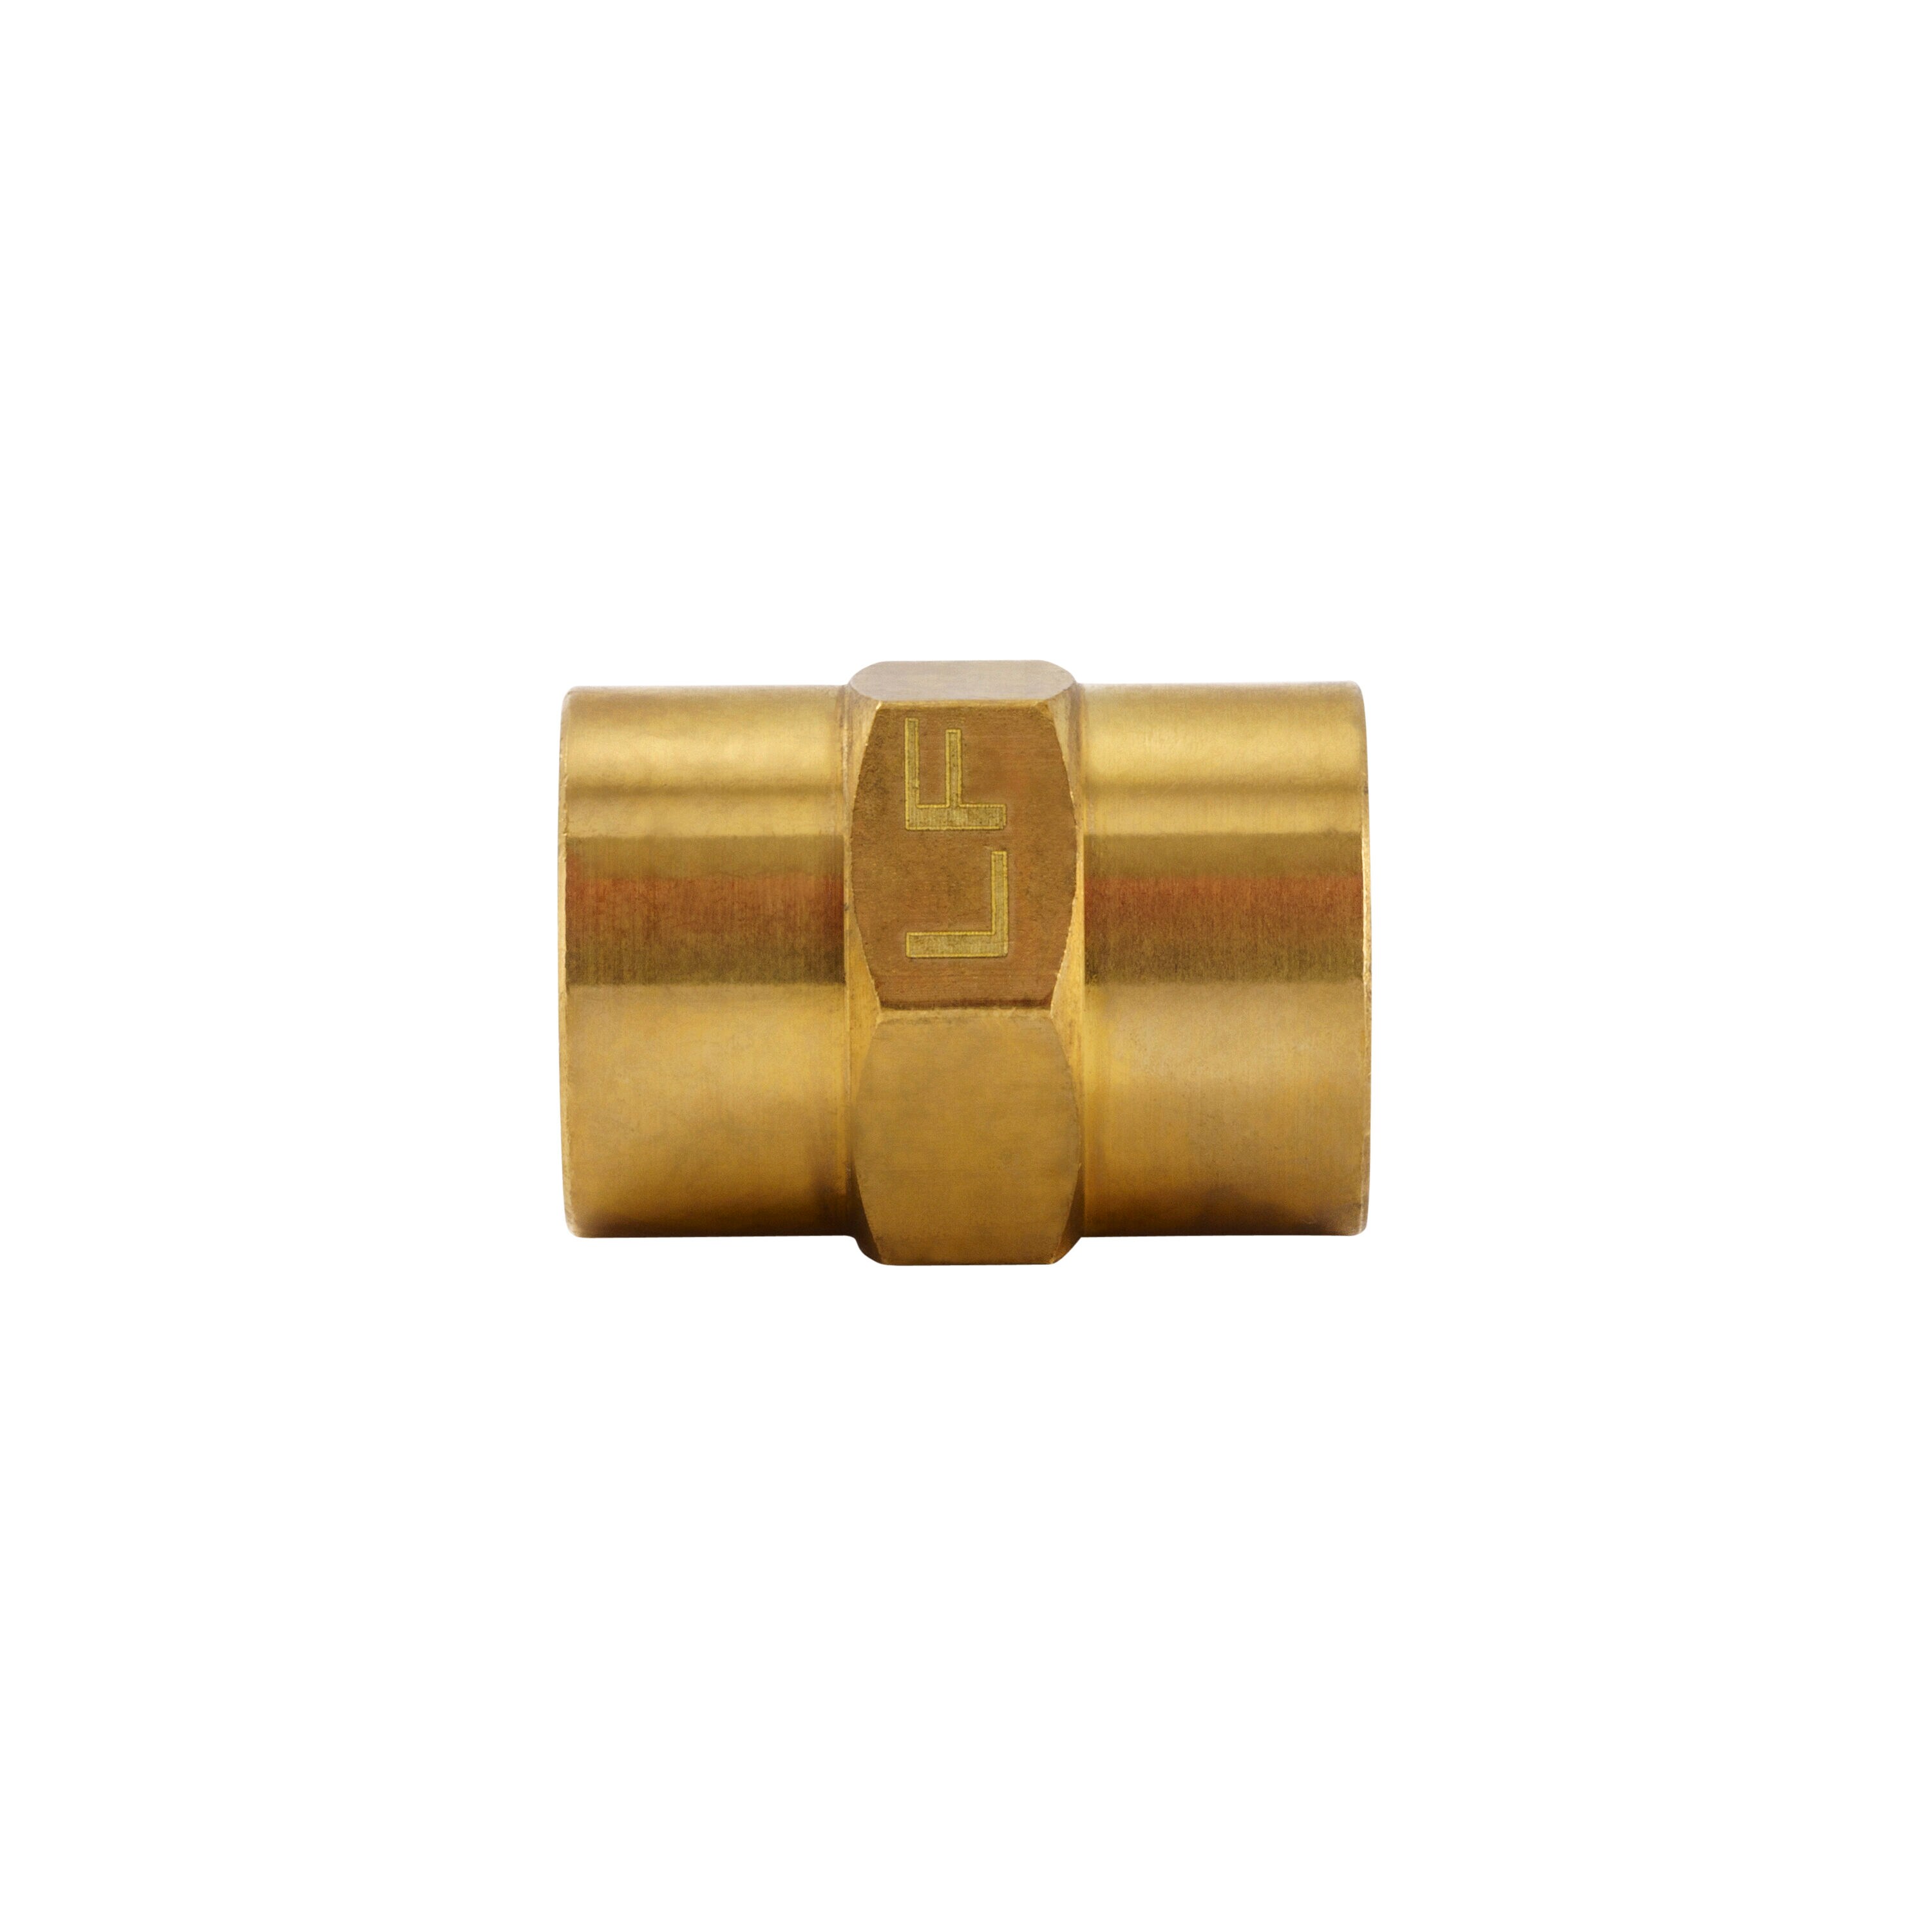 Proline Series 1/4-in x 1/4-in Threaded Coupling Fitting in the